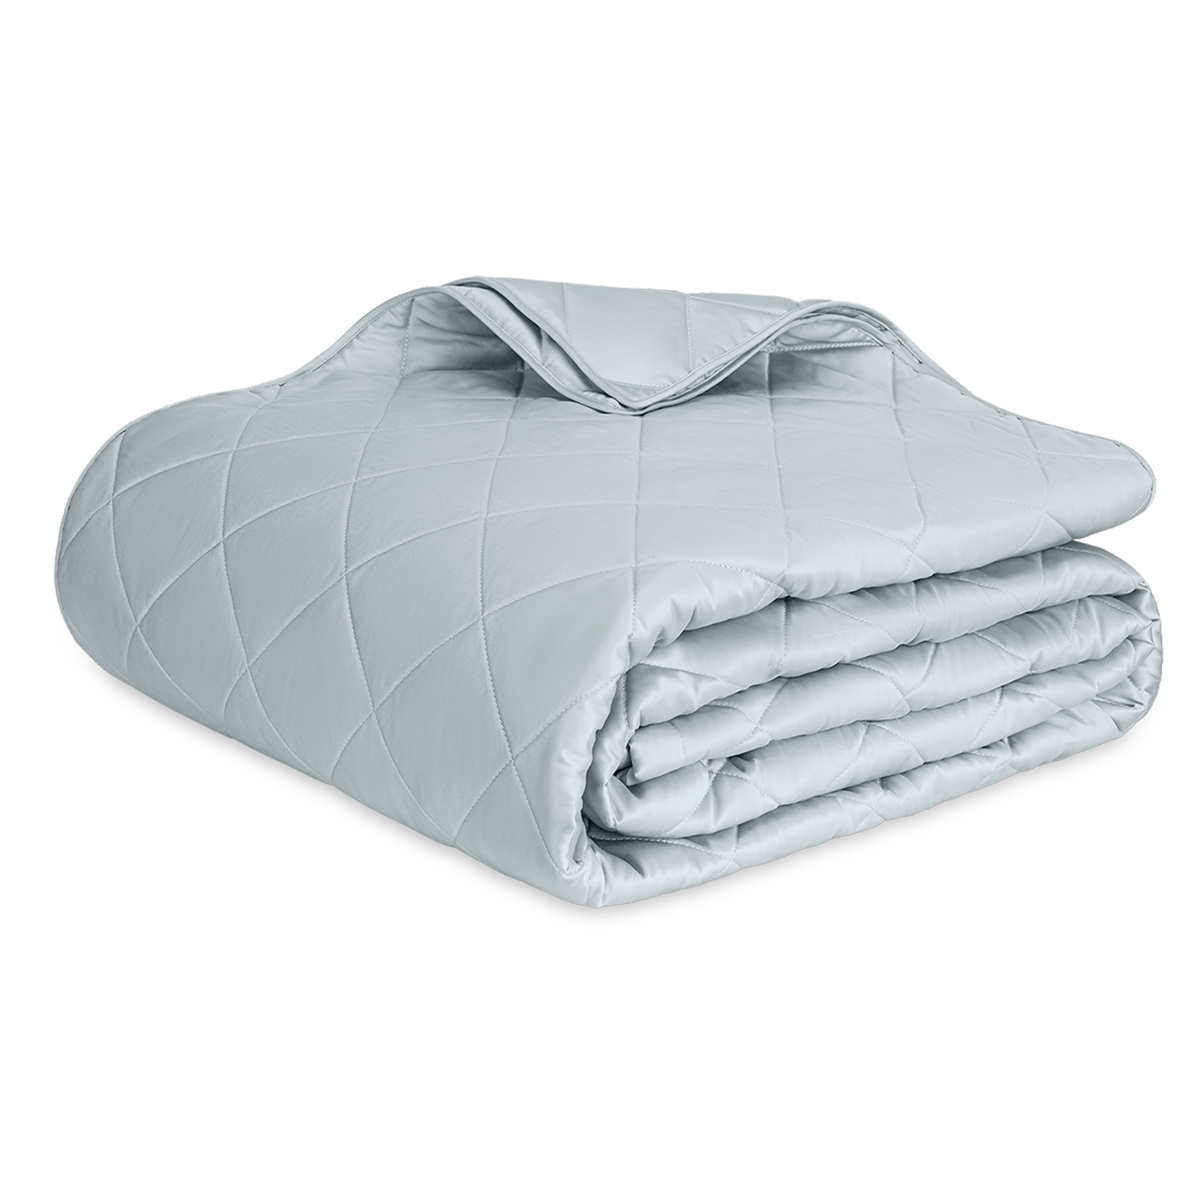 Silo Image of Matouk Nocturne Quilted Bedding Quilt in Pool